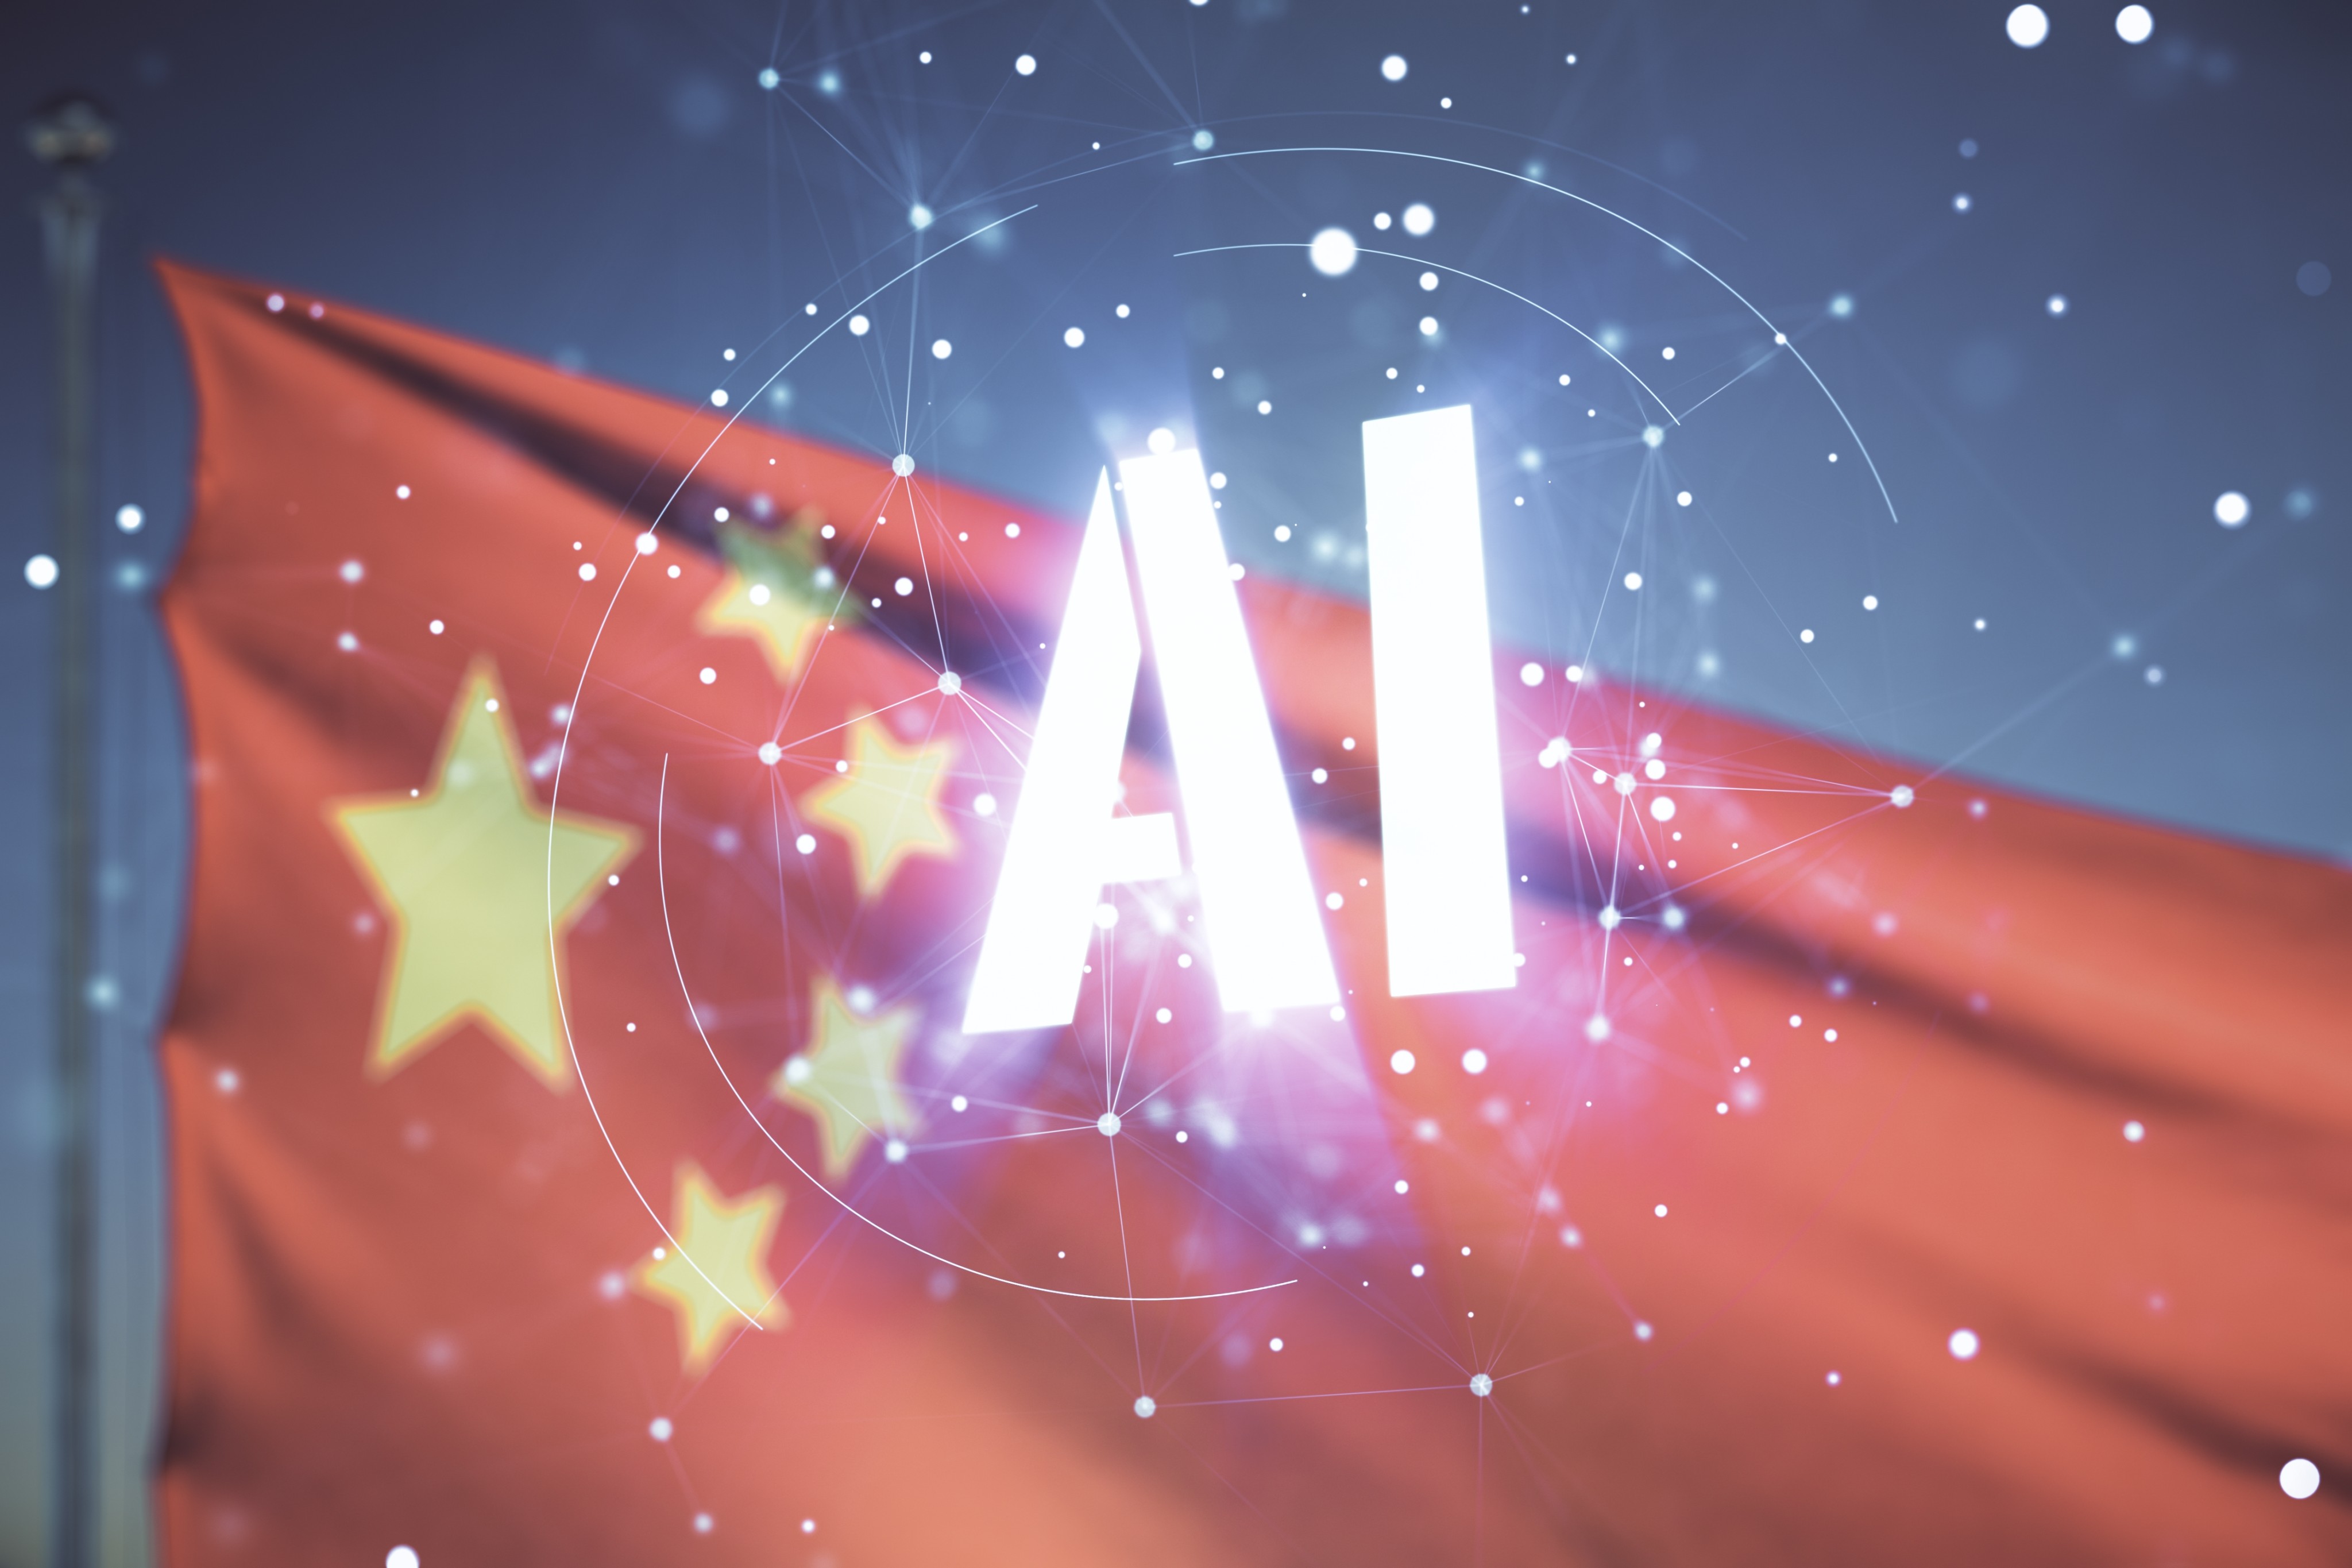 Shanghai’s draft artificial intelligence plan reflects the concerted effort by local authorities to build up the regulatory infrastructure behind this hi-tech industry. Image: Shutterstock